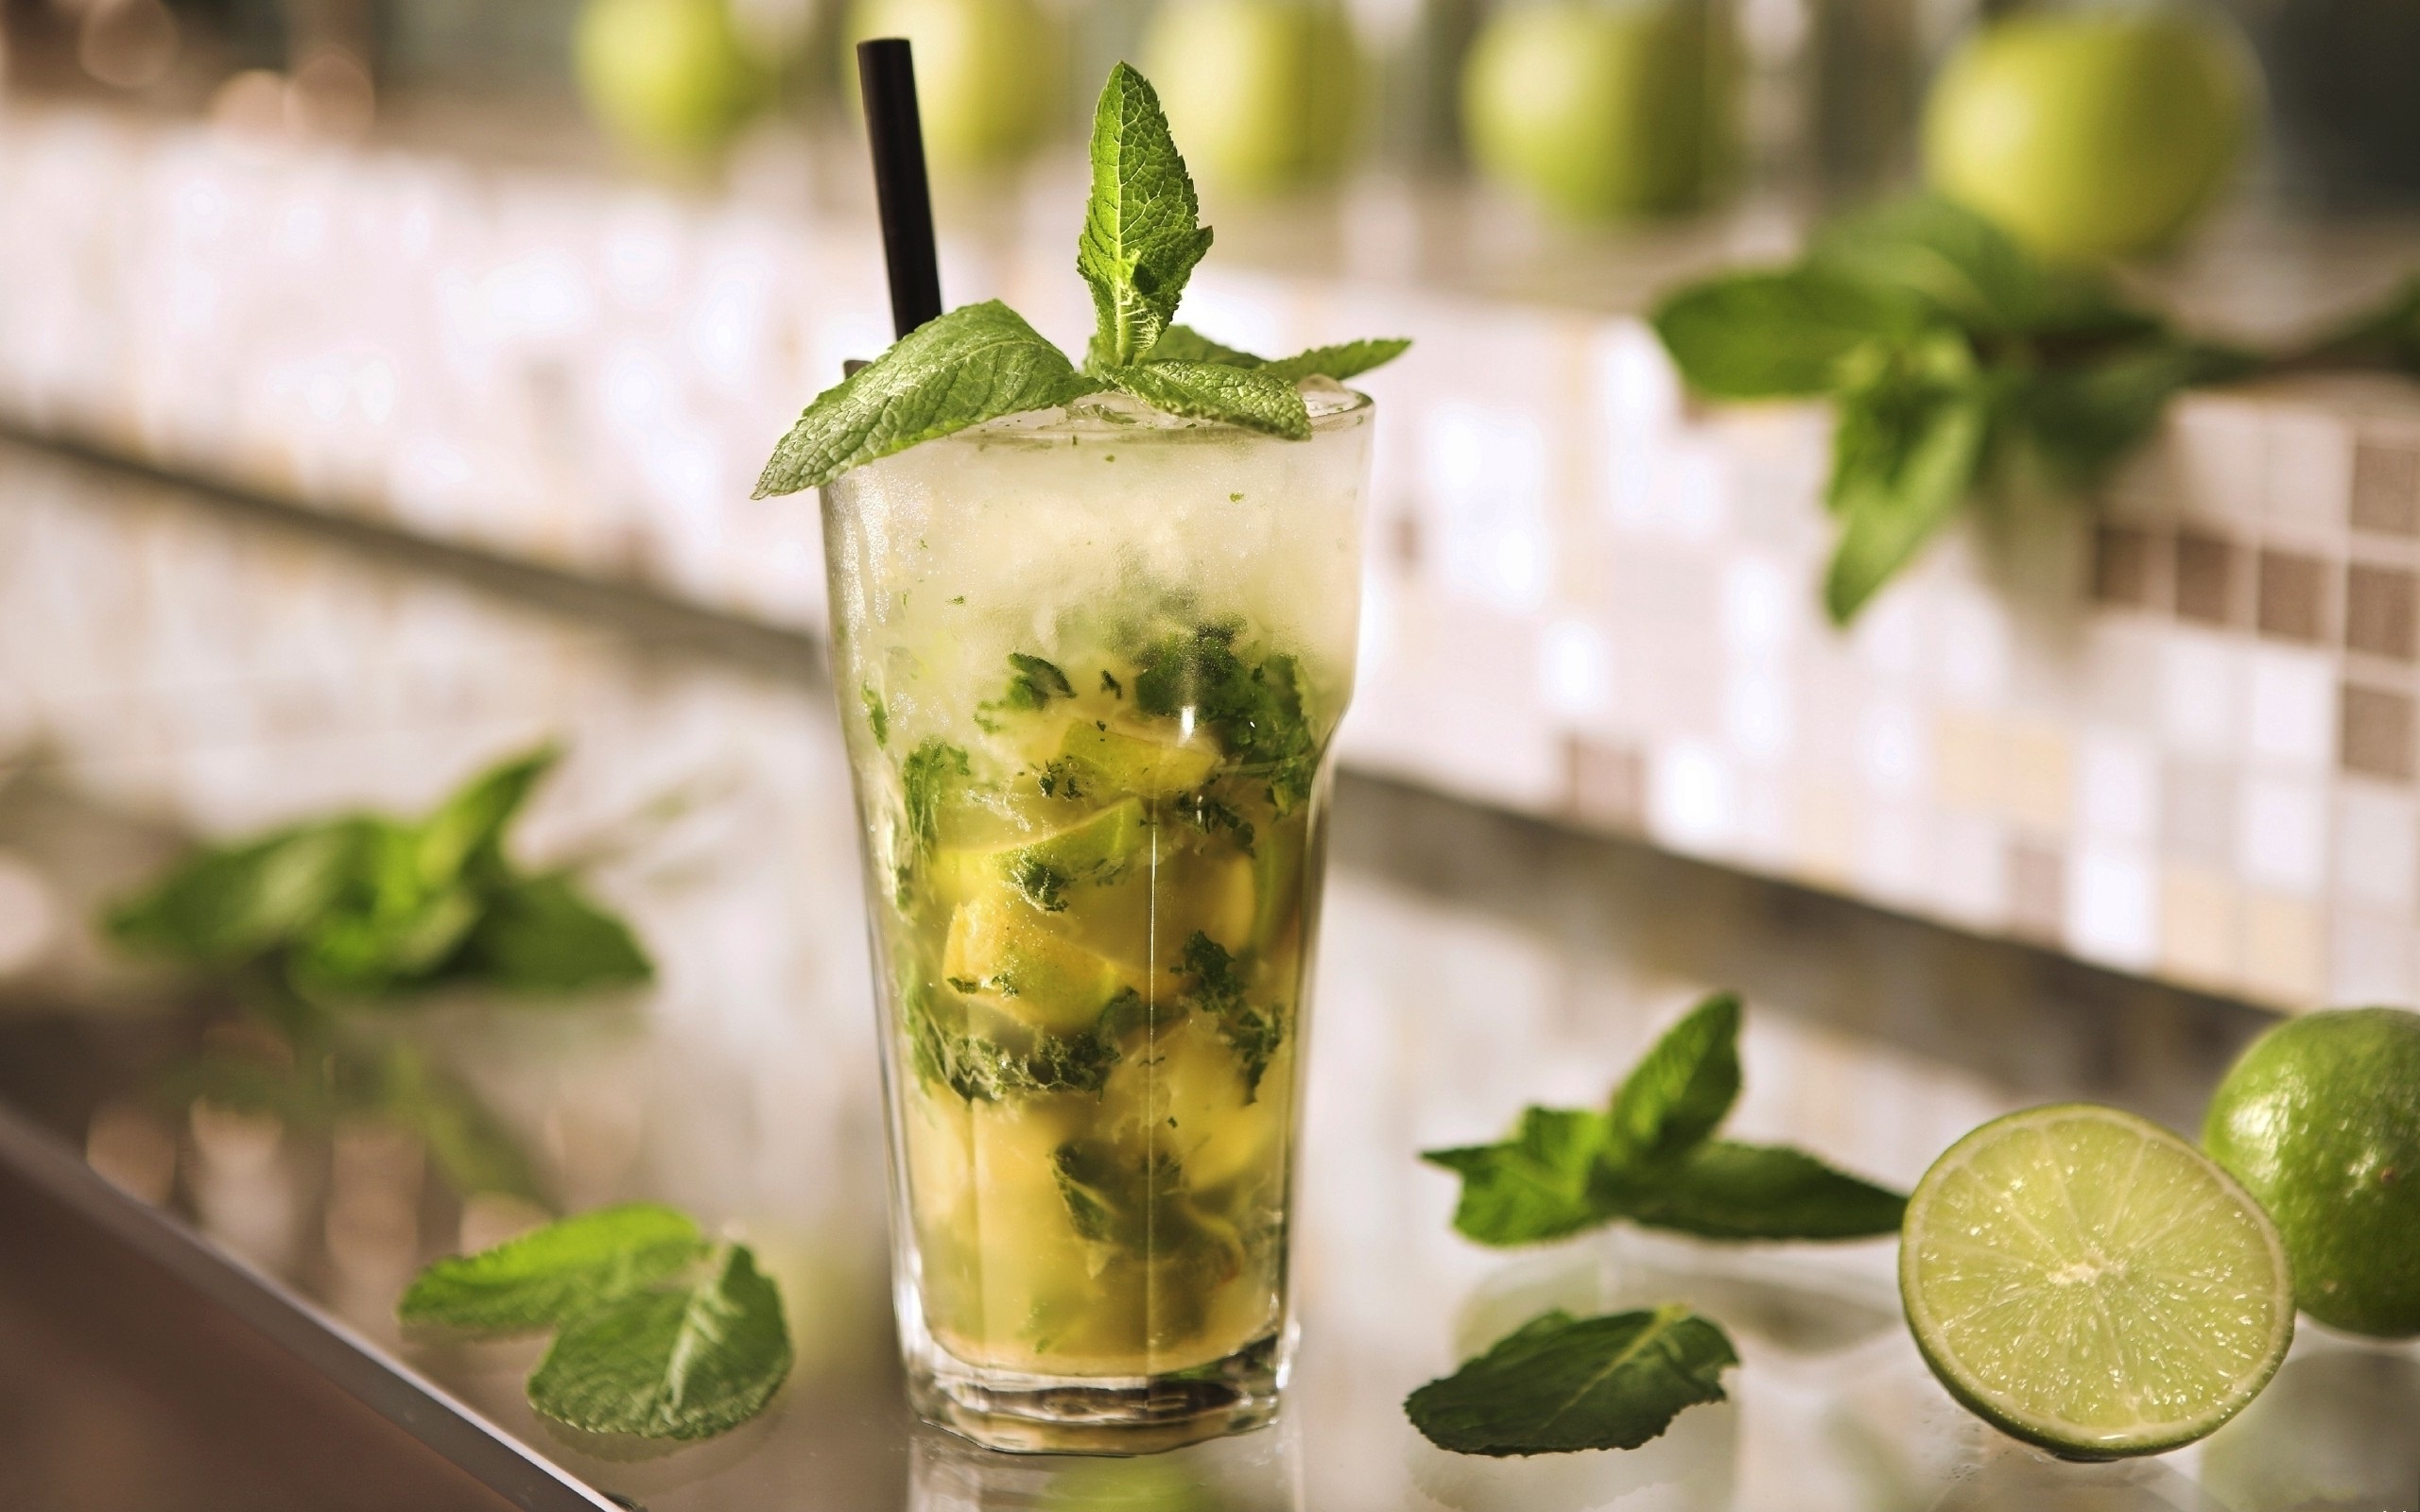 Mint Plant, Cool beverages, Green leaves, Icy refreshment, 2560x1600 HD Desktop